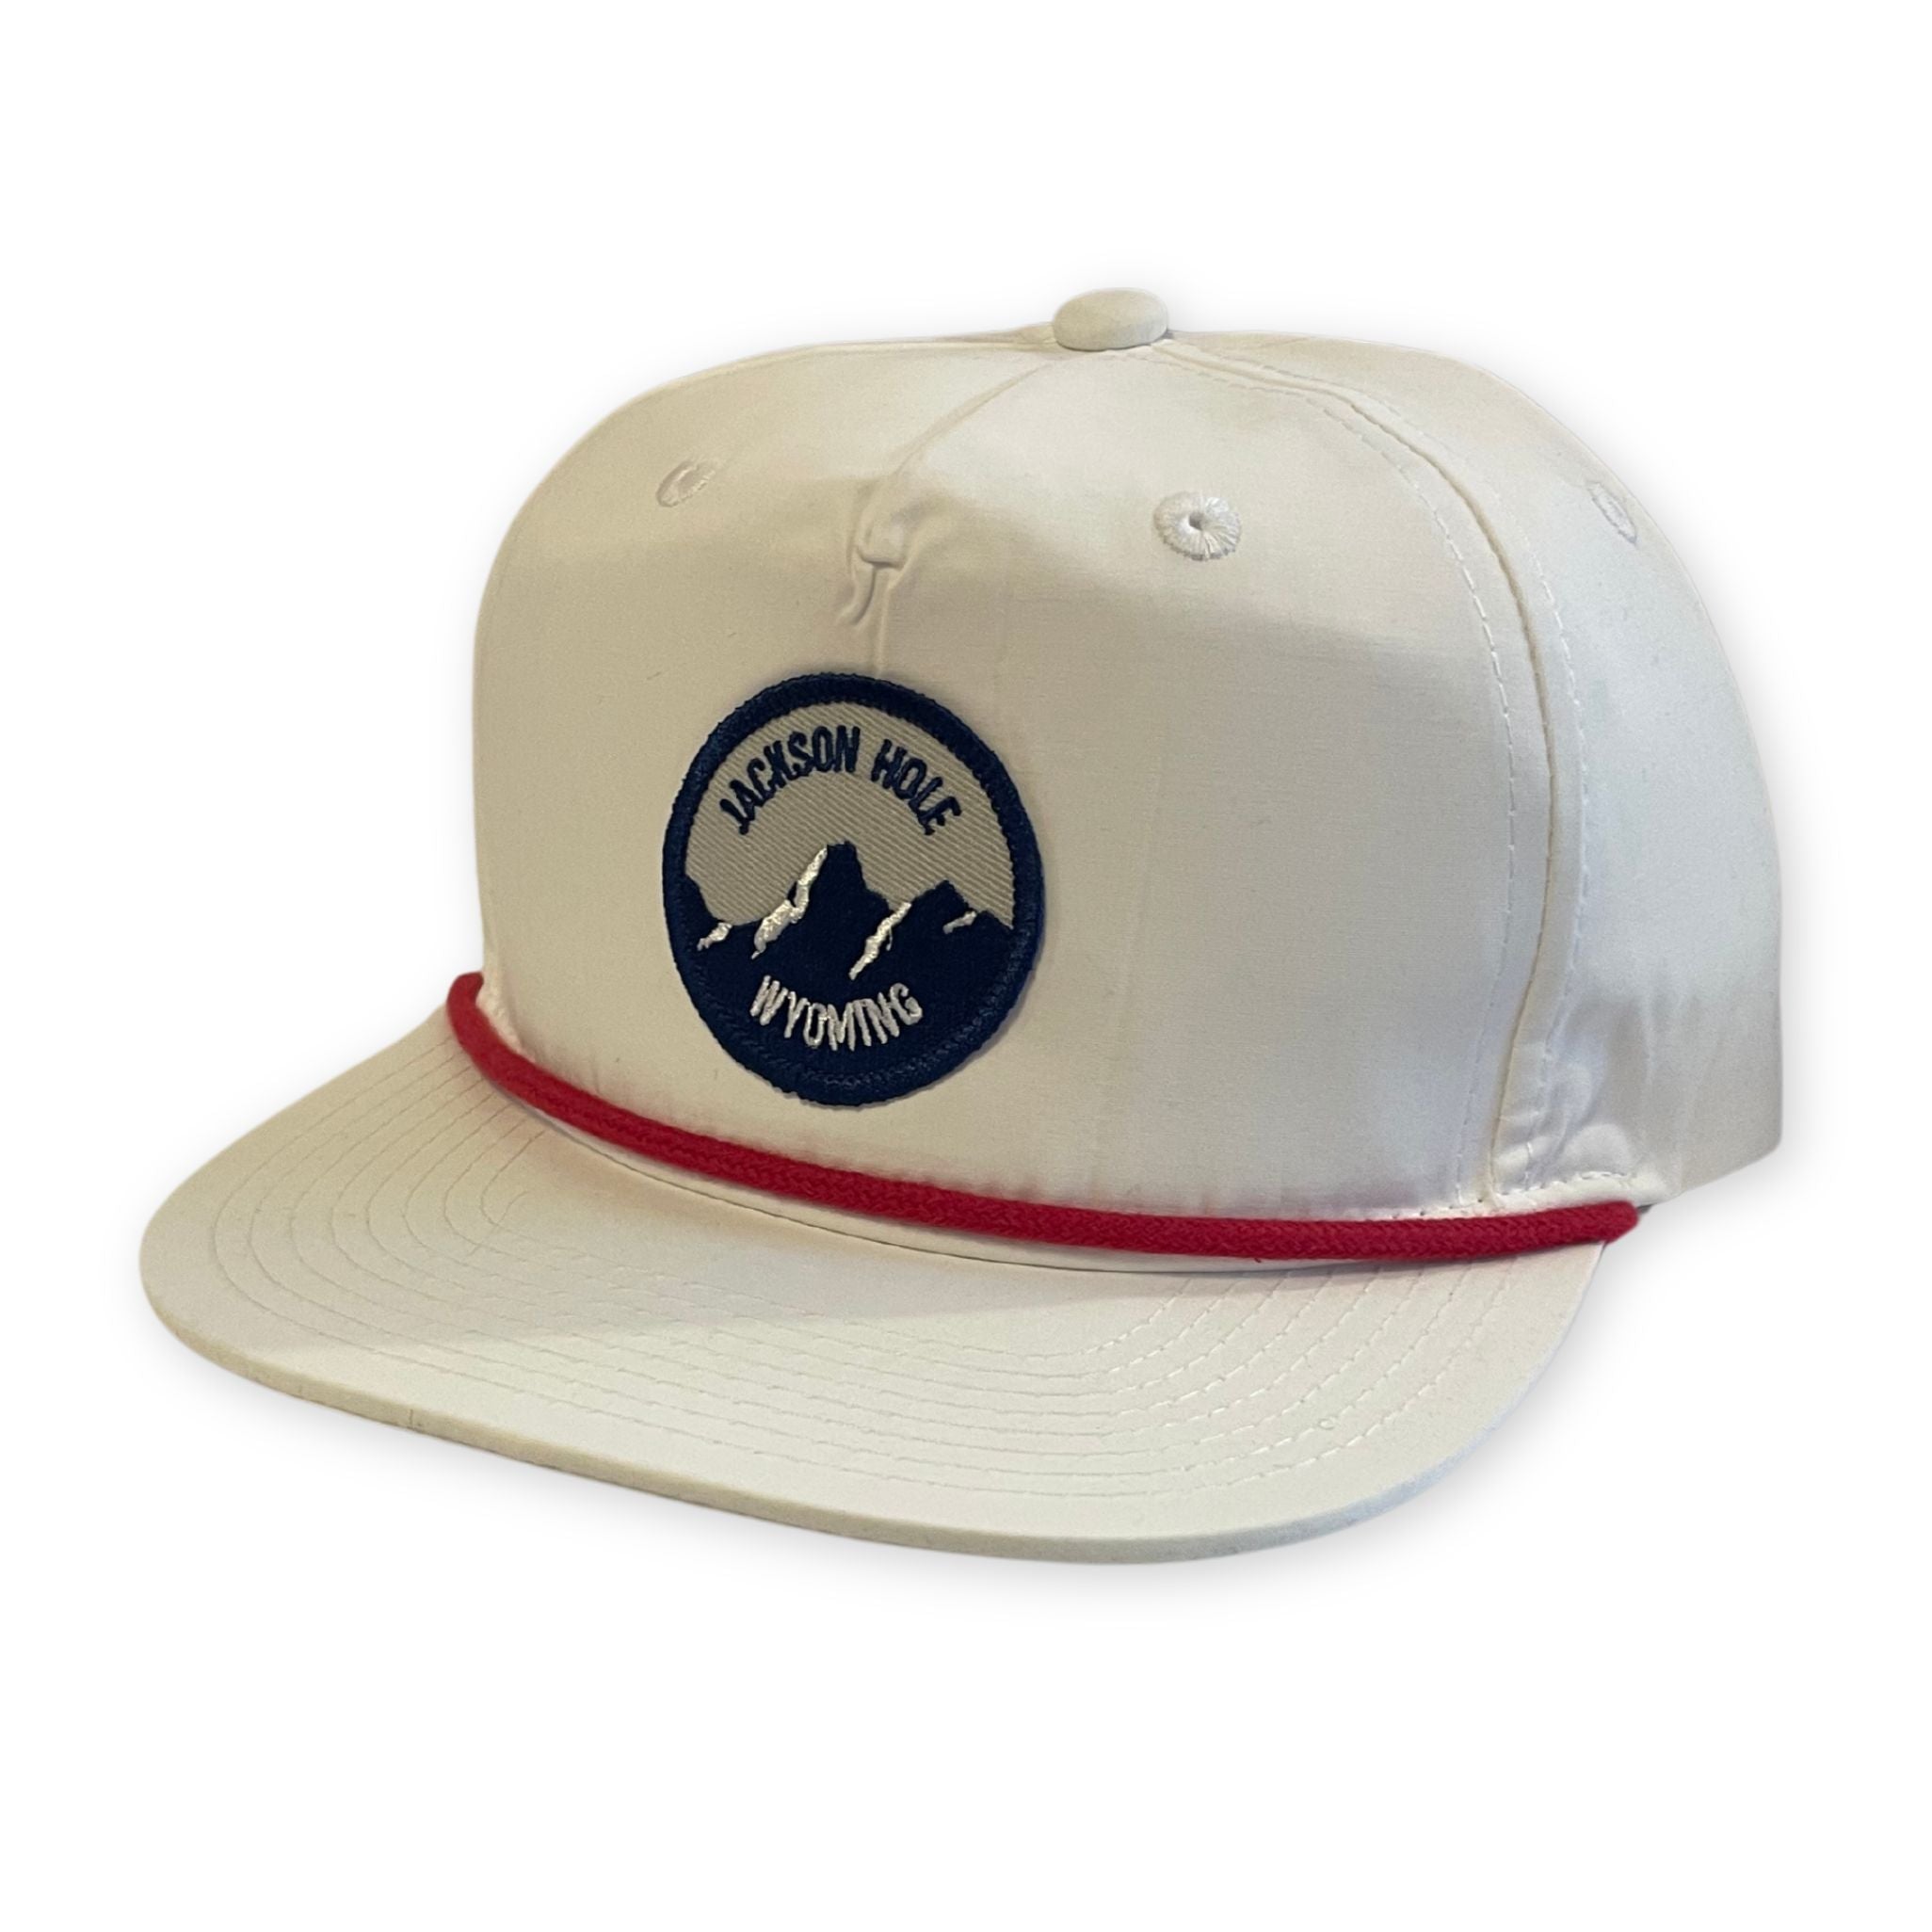 White Flat Brim Hat with Red Roping and a Round Jackson Hole Mountain Patch 